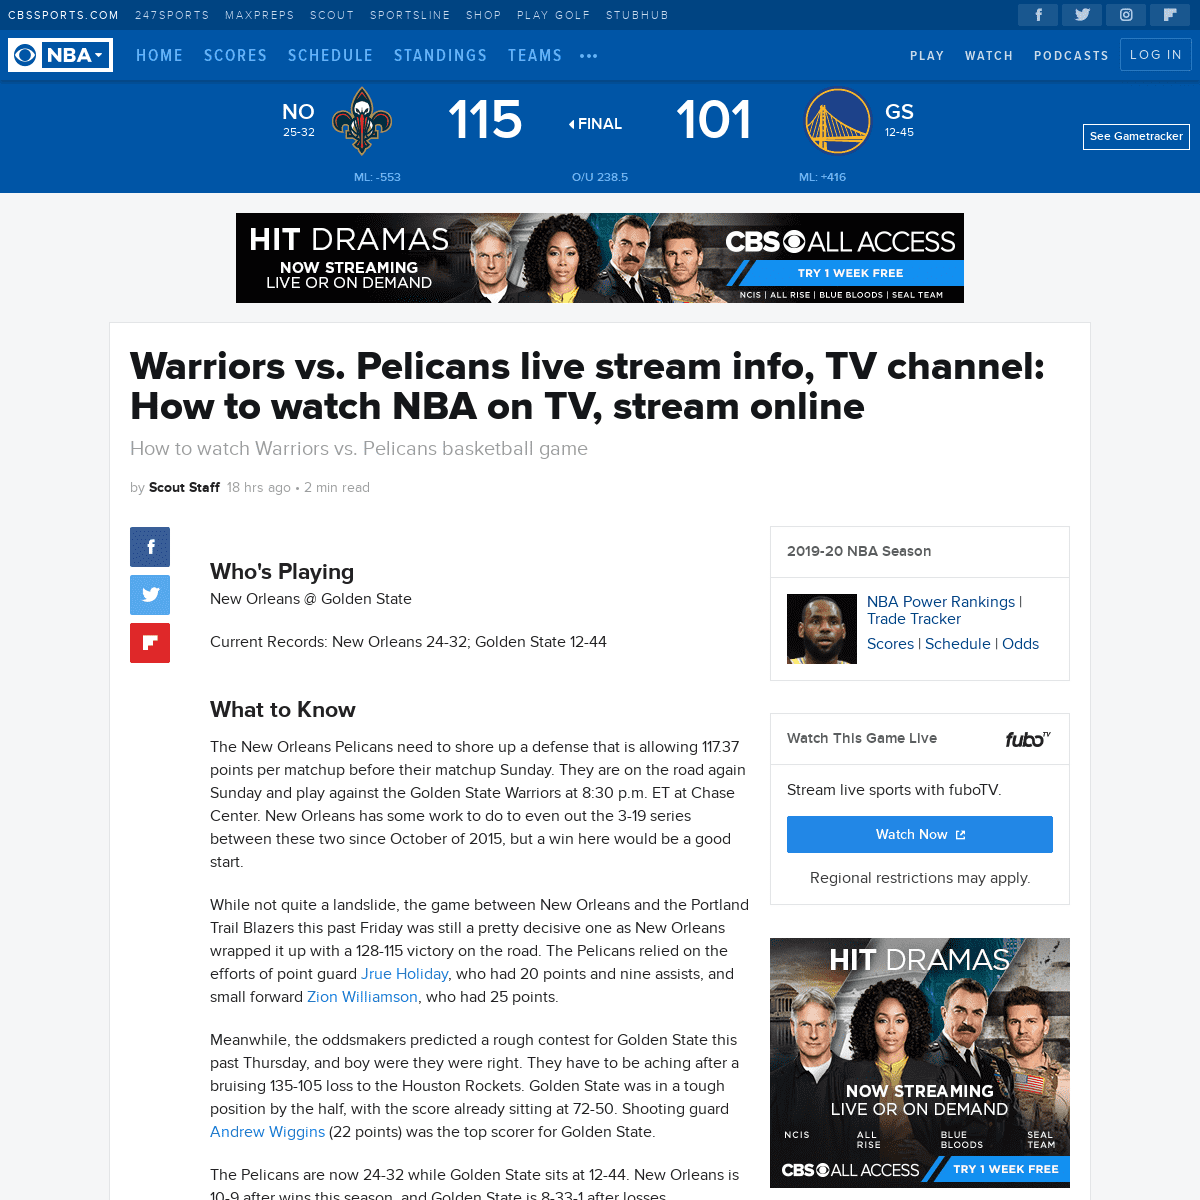 A complete backup of www.cbssports.com/nba/news/warriors-vs-pelicans-live-stream-info-tv-channel-how-to-watch-nba-on-tv-stream-o